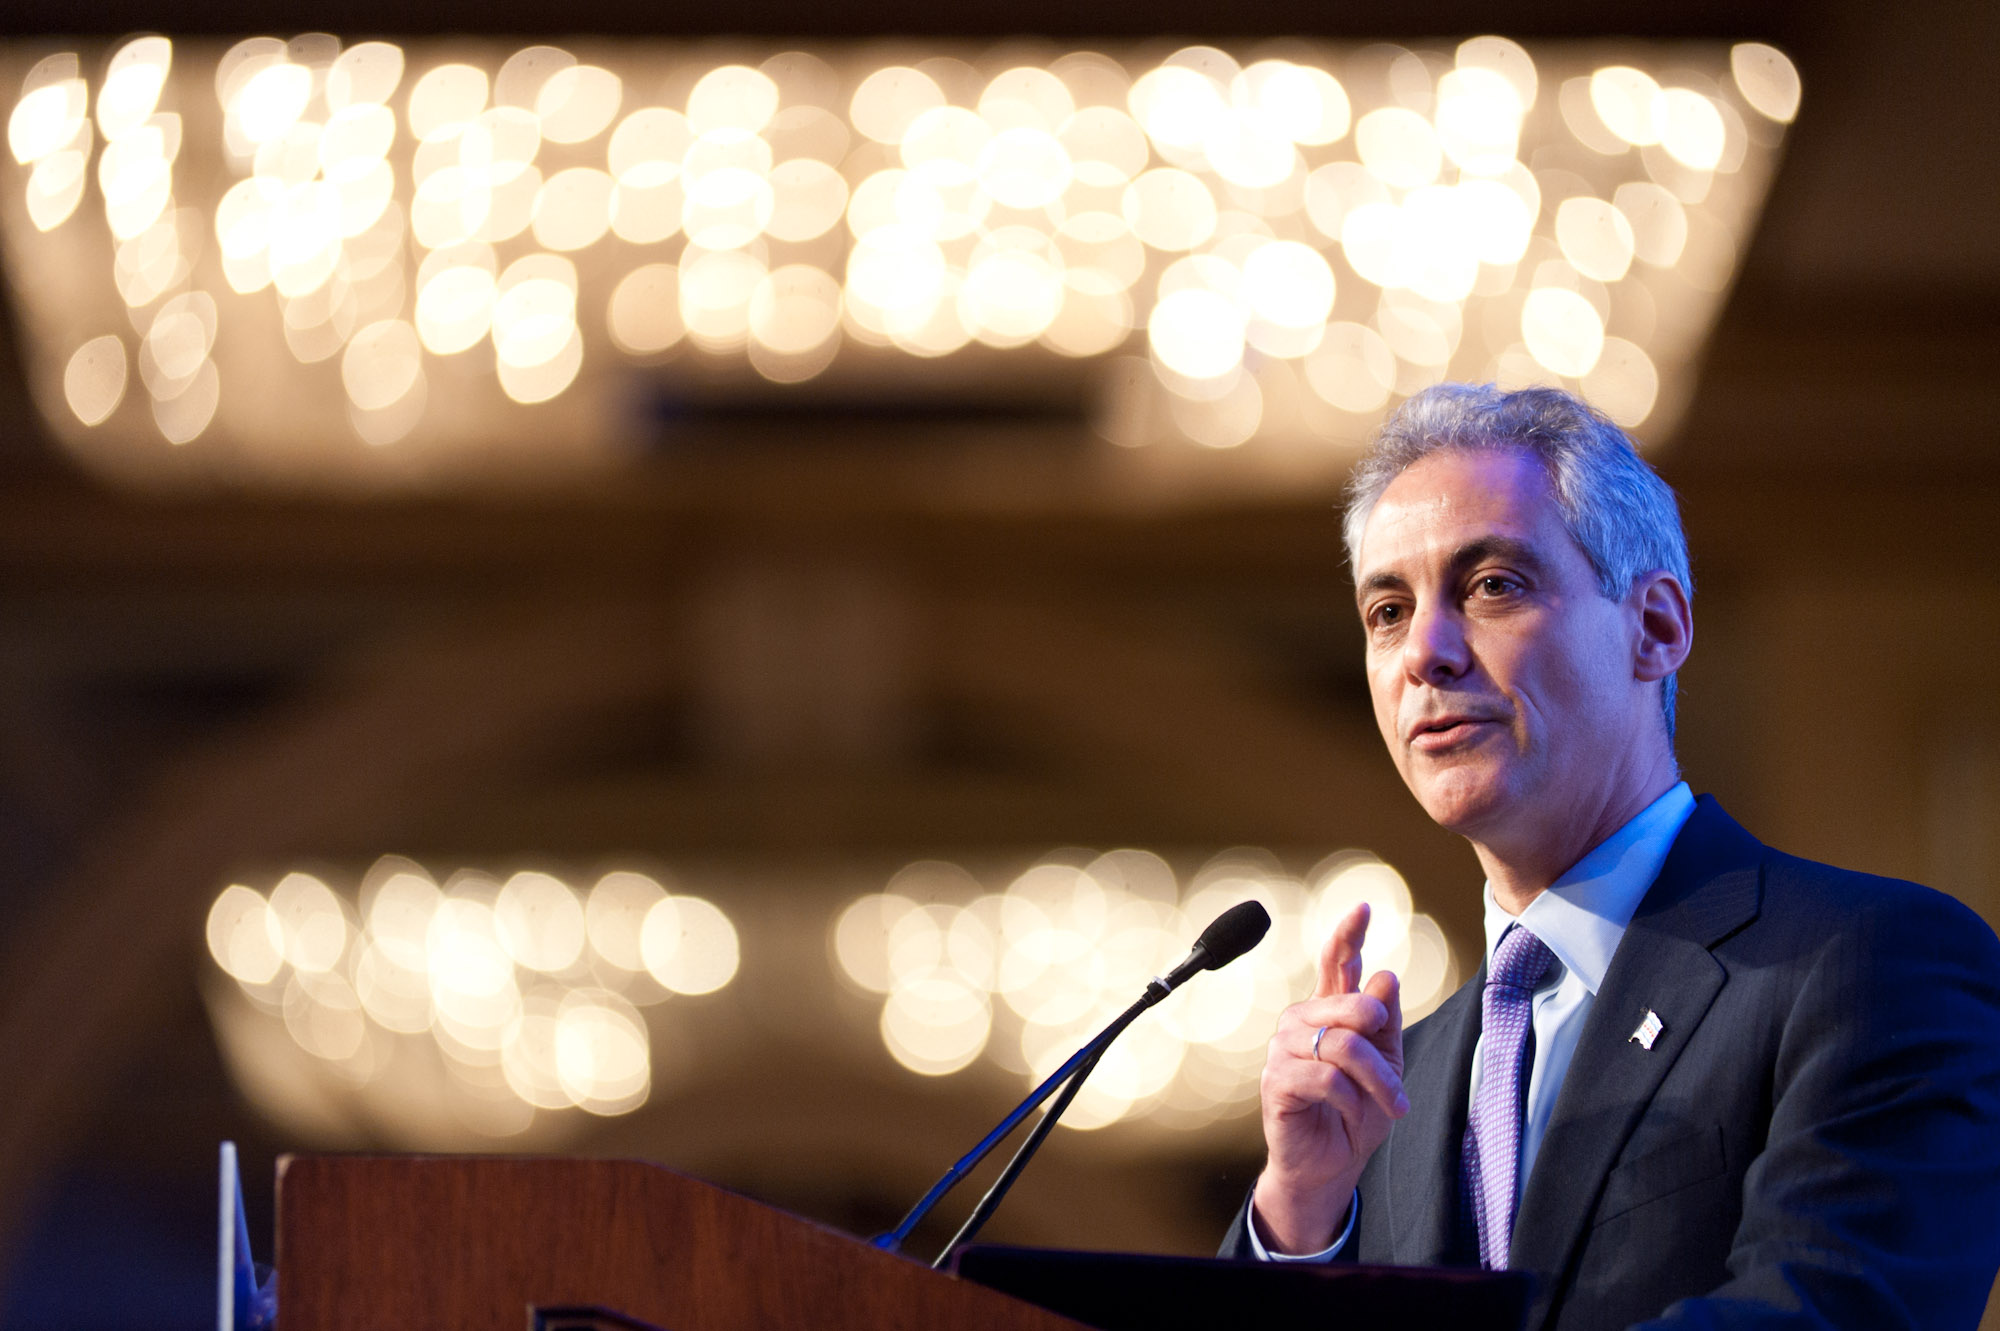 Mayor Emanuel Discusses Increasing Access to High-Quality Early Learning Programs at the Ounce of Prevention Luncheon